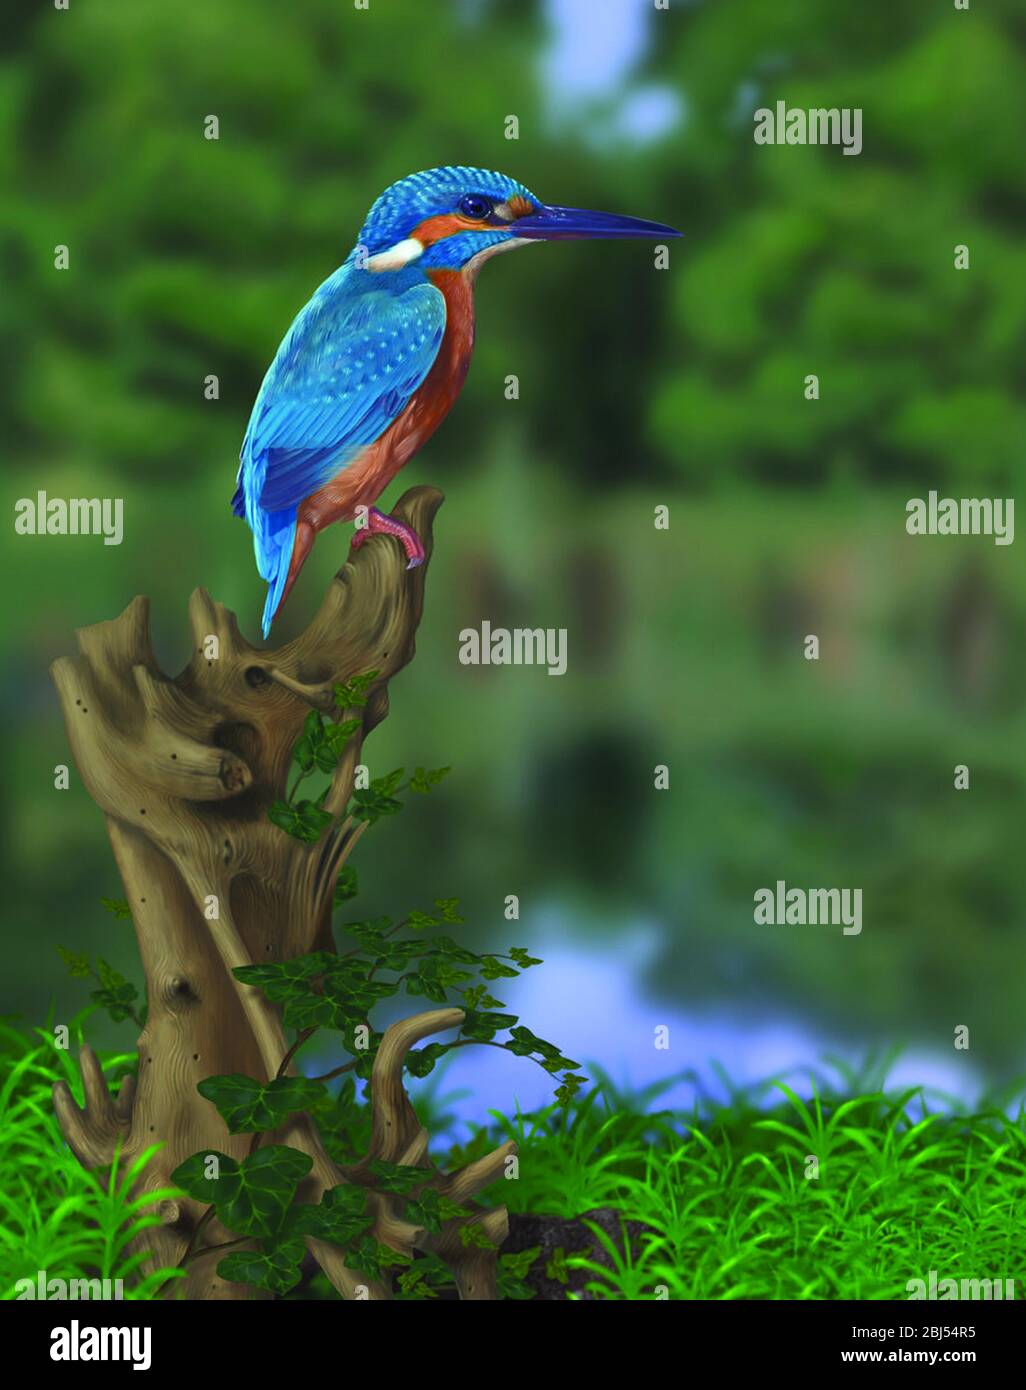 Common Kingfisher (Digital Painting). (Alcedo at this) also known as Eurasian Kingfisher or River Kingfisher, is a small kingfisher. Stock Photo